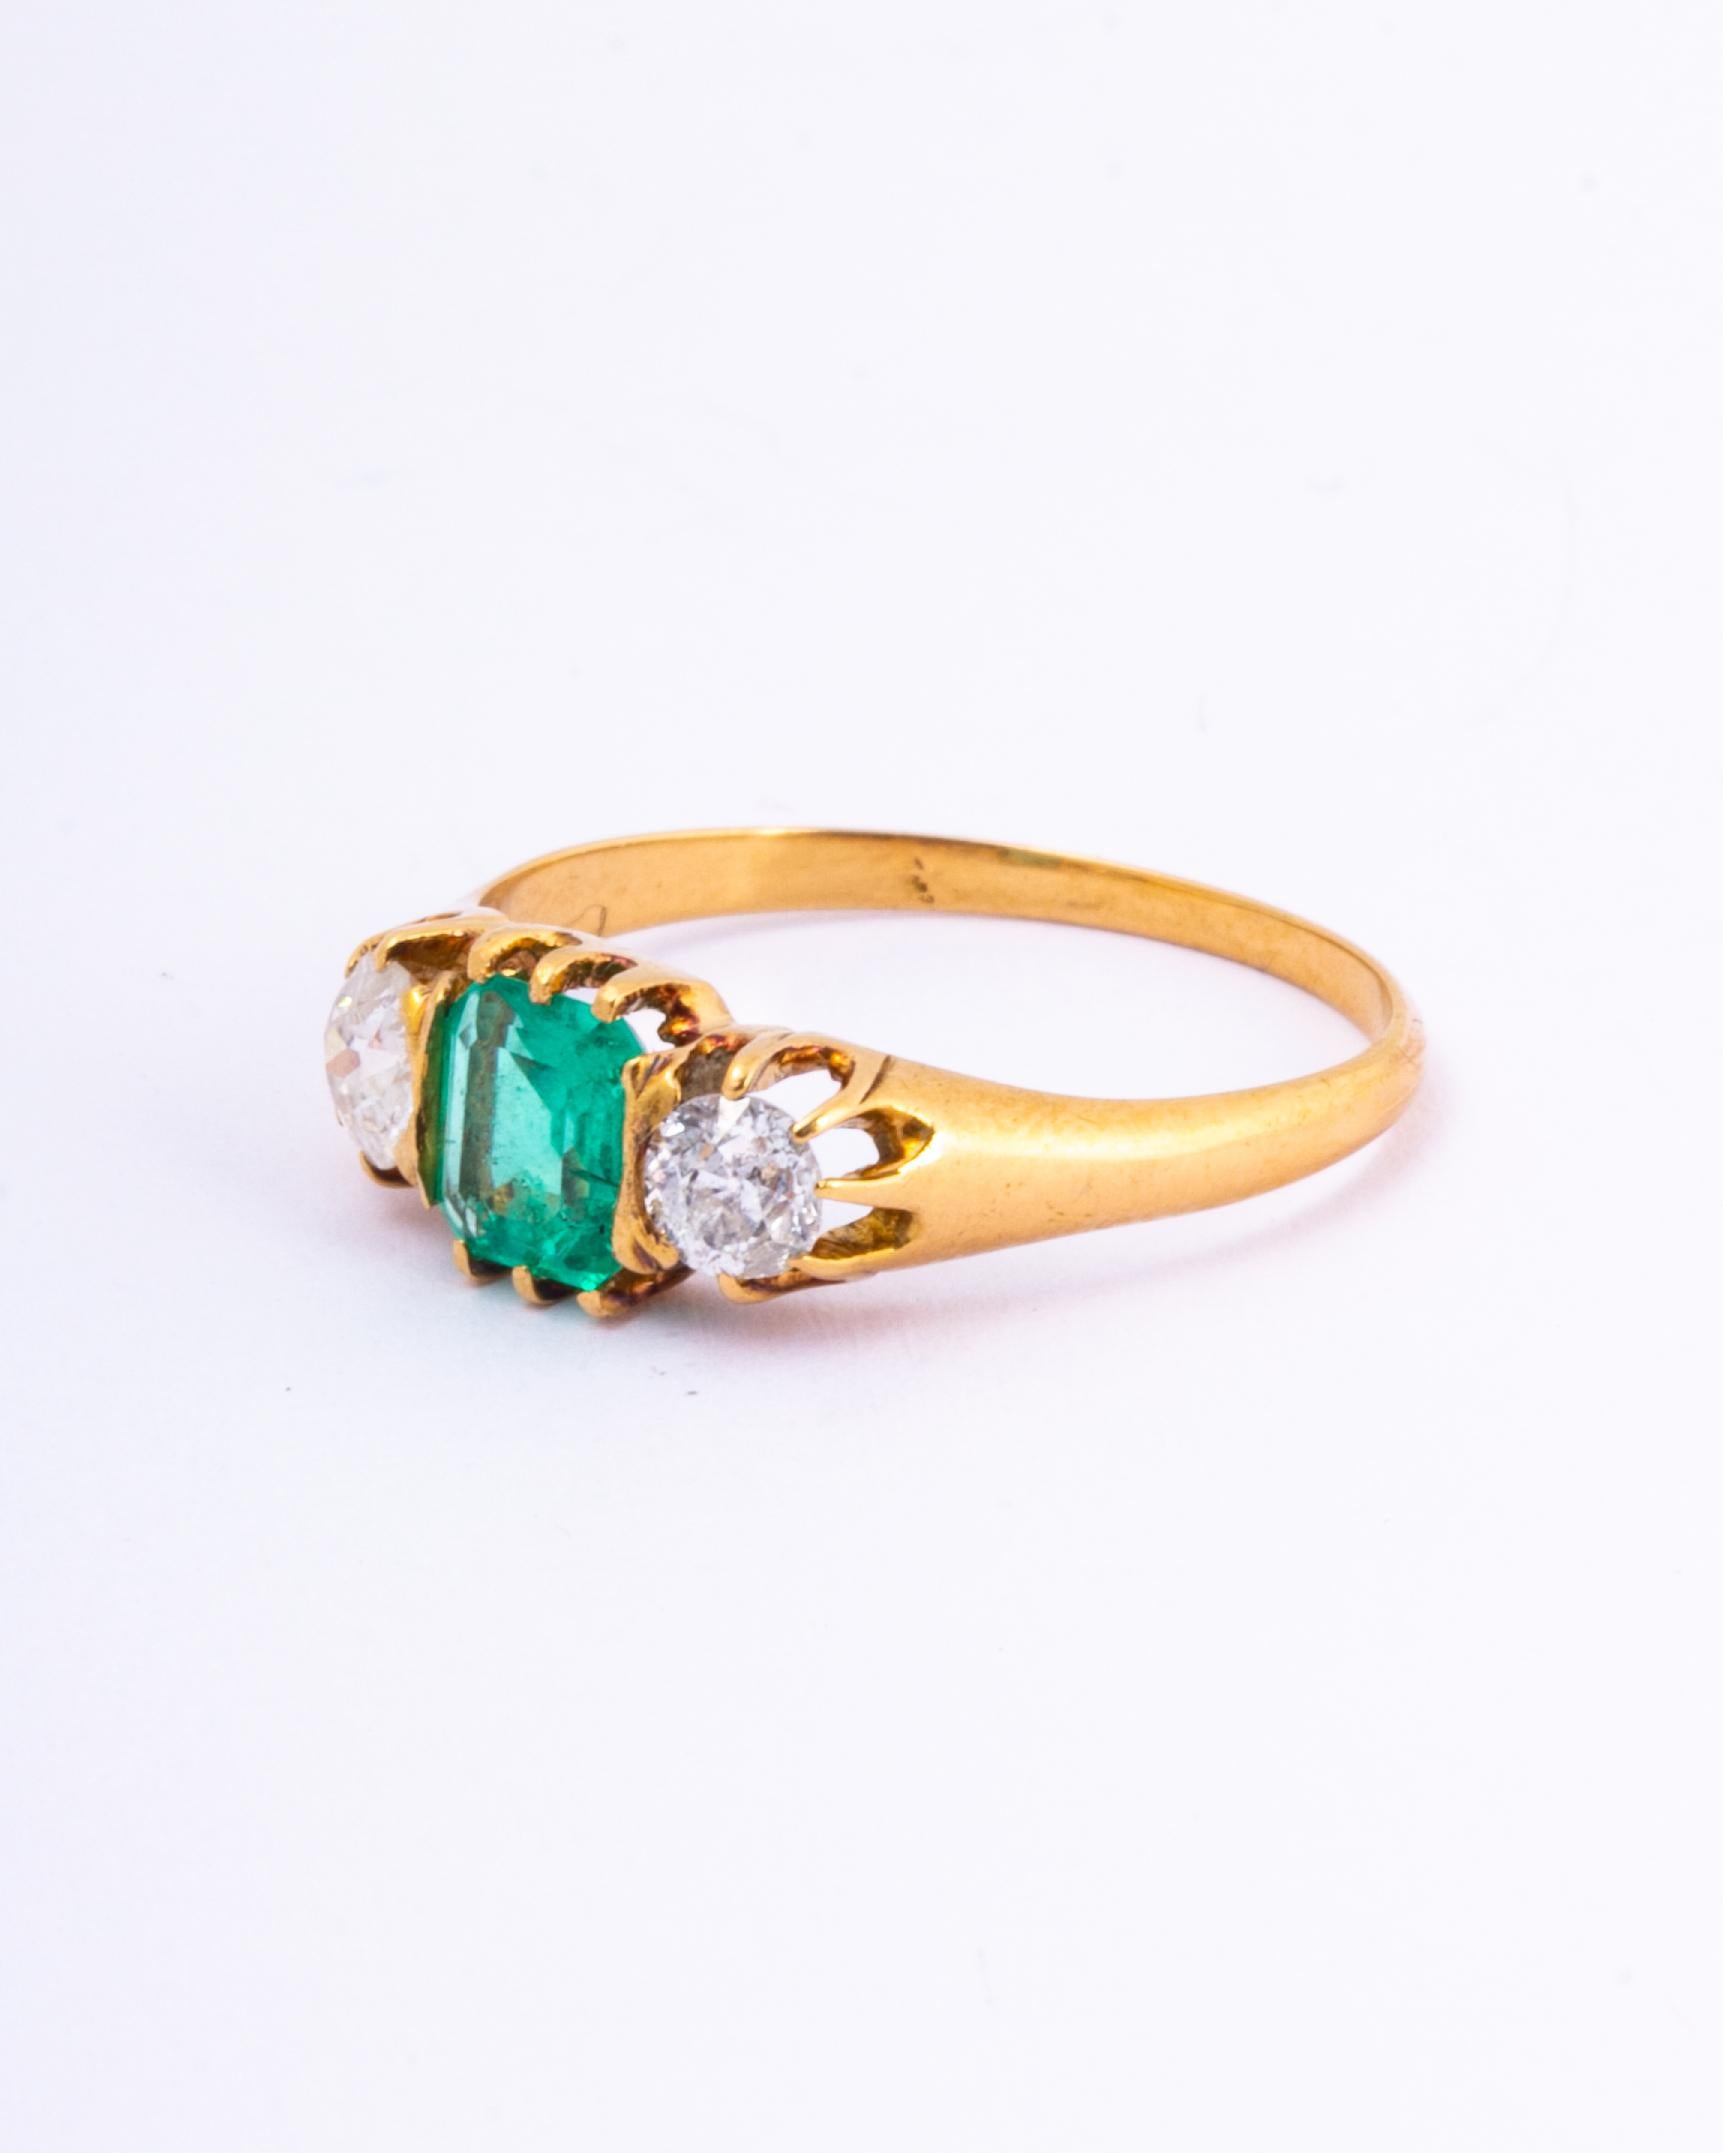 The central emerald is so bright and beautiful and measures 75pts. Sat either side it are two bright shimmering old European cut diamonds each measuring 30pts. The ring is modelled in 18ct gold.

Ring Size: O 1/2 or 7 1/2 
Width: 7mm
Height Off